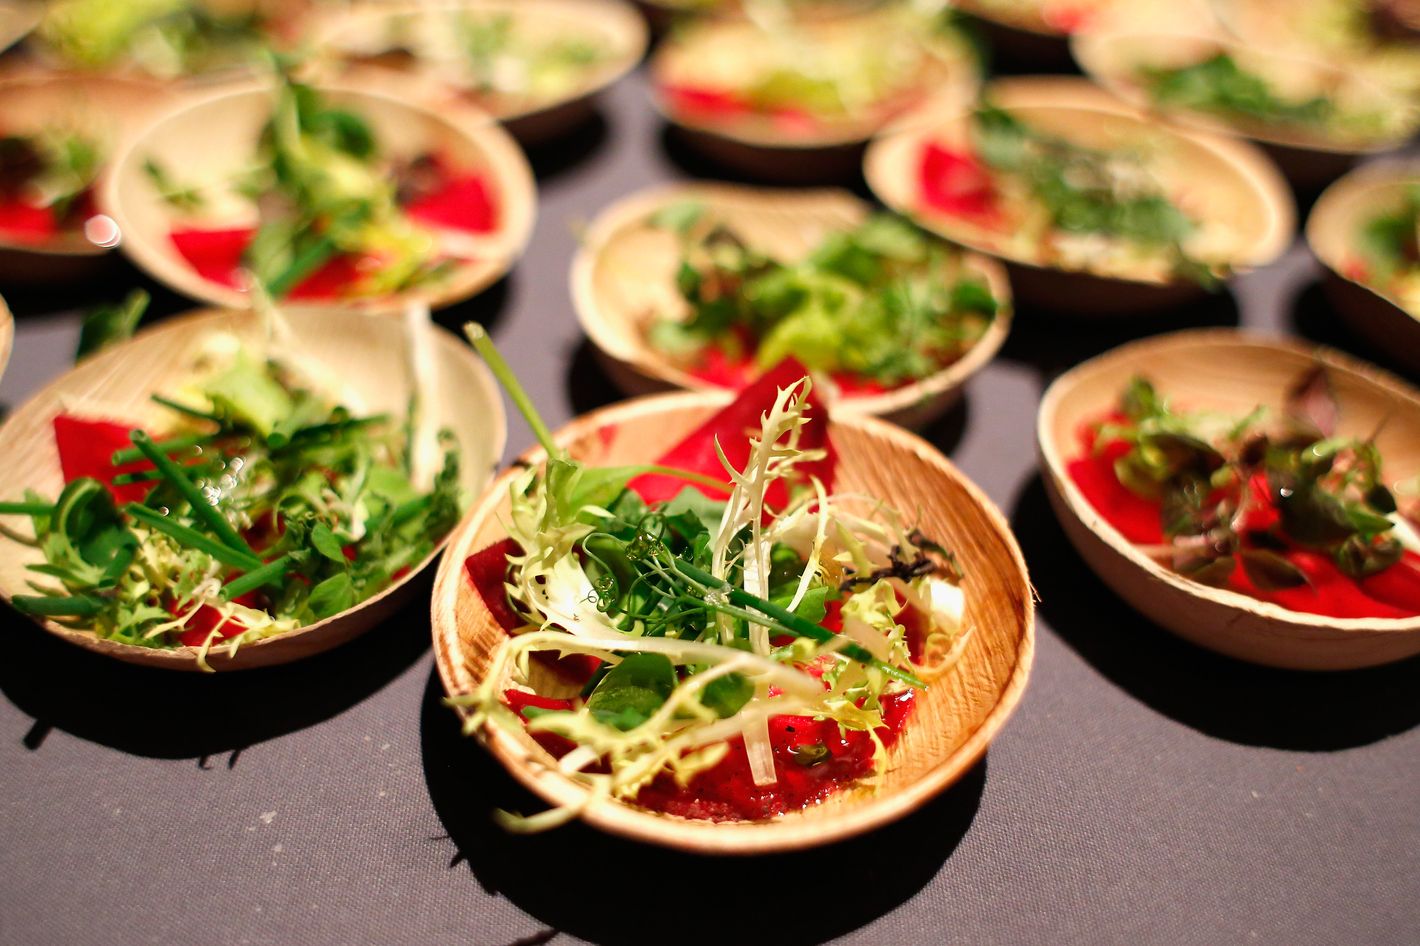 Here’s What Everyone Ate at This Year’s New York Taste